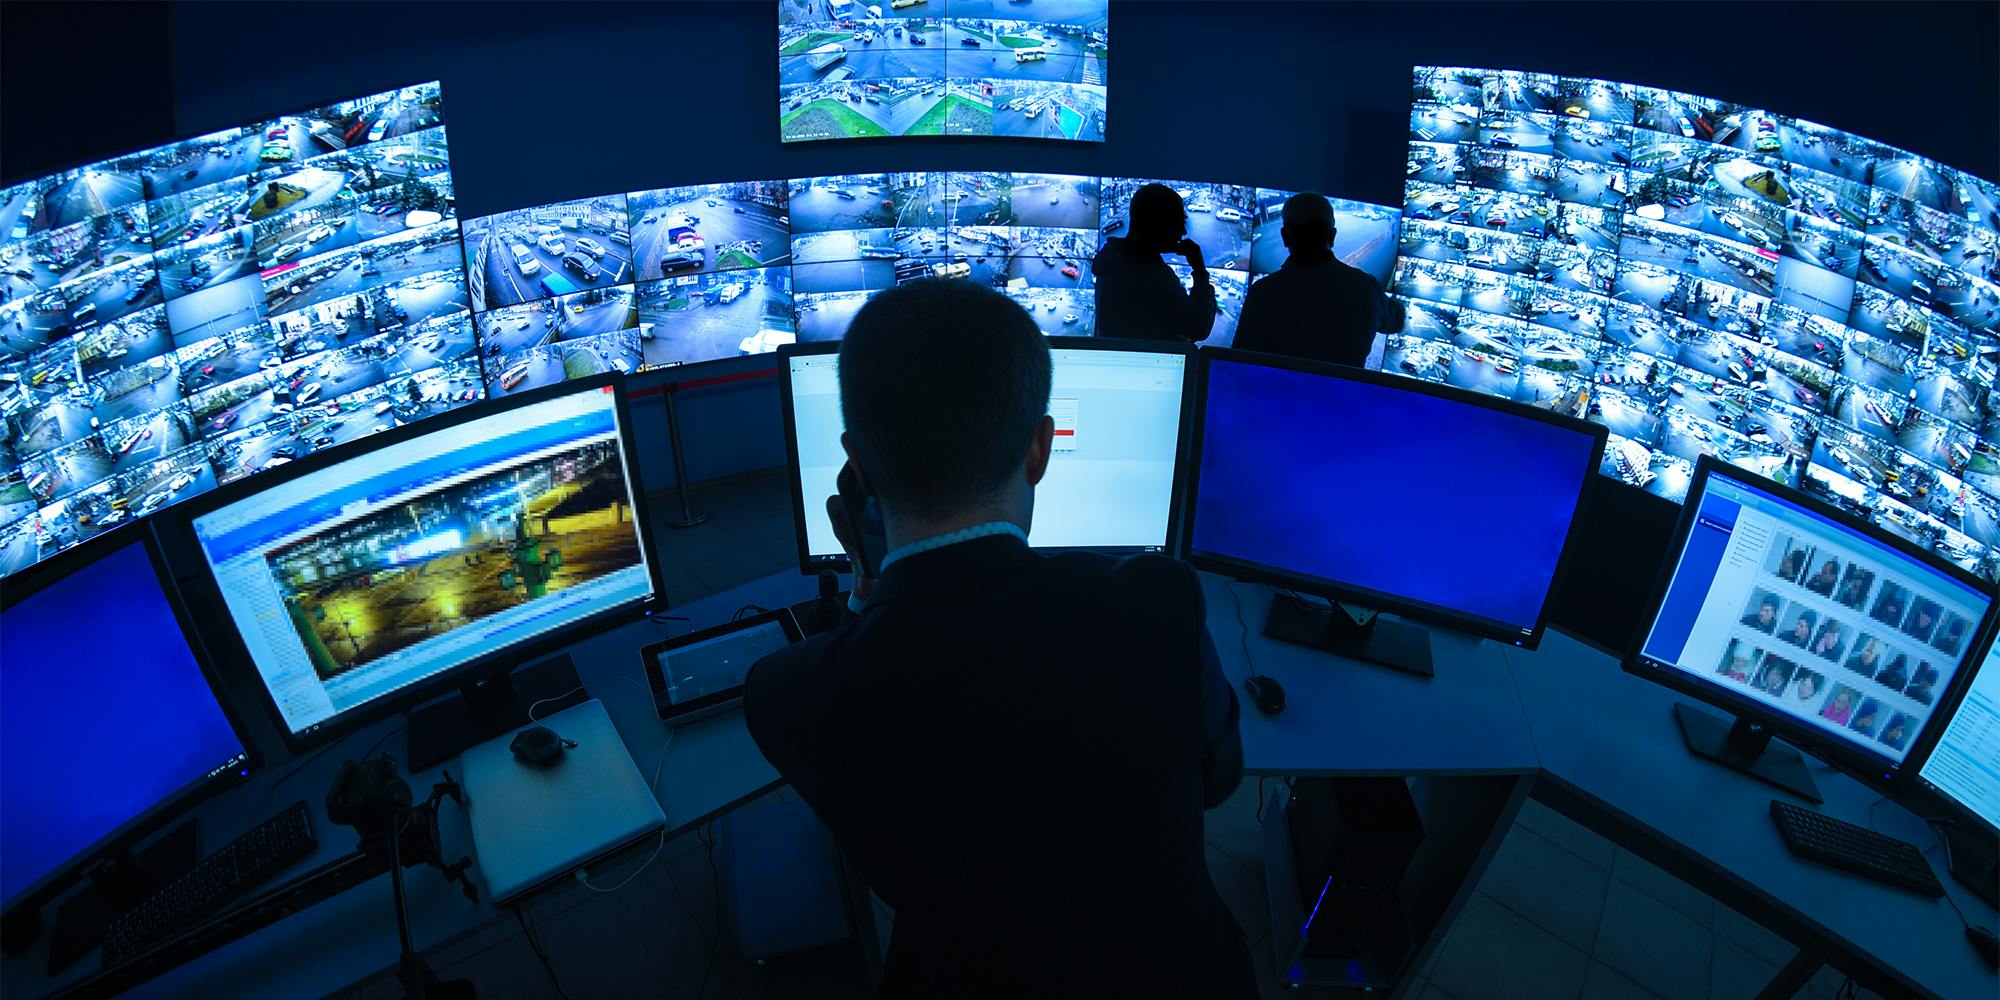 A CCTV security room looking at monitors, the cameras show facial recognition being used.